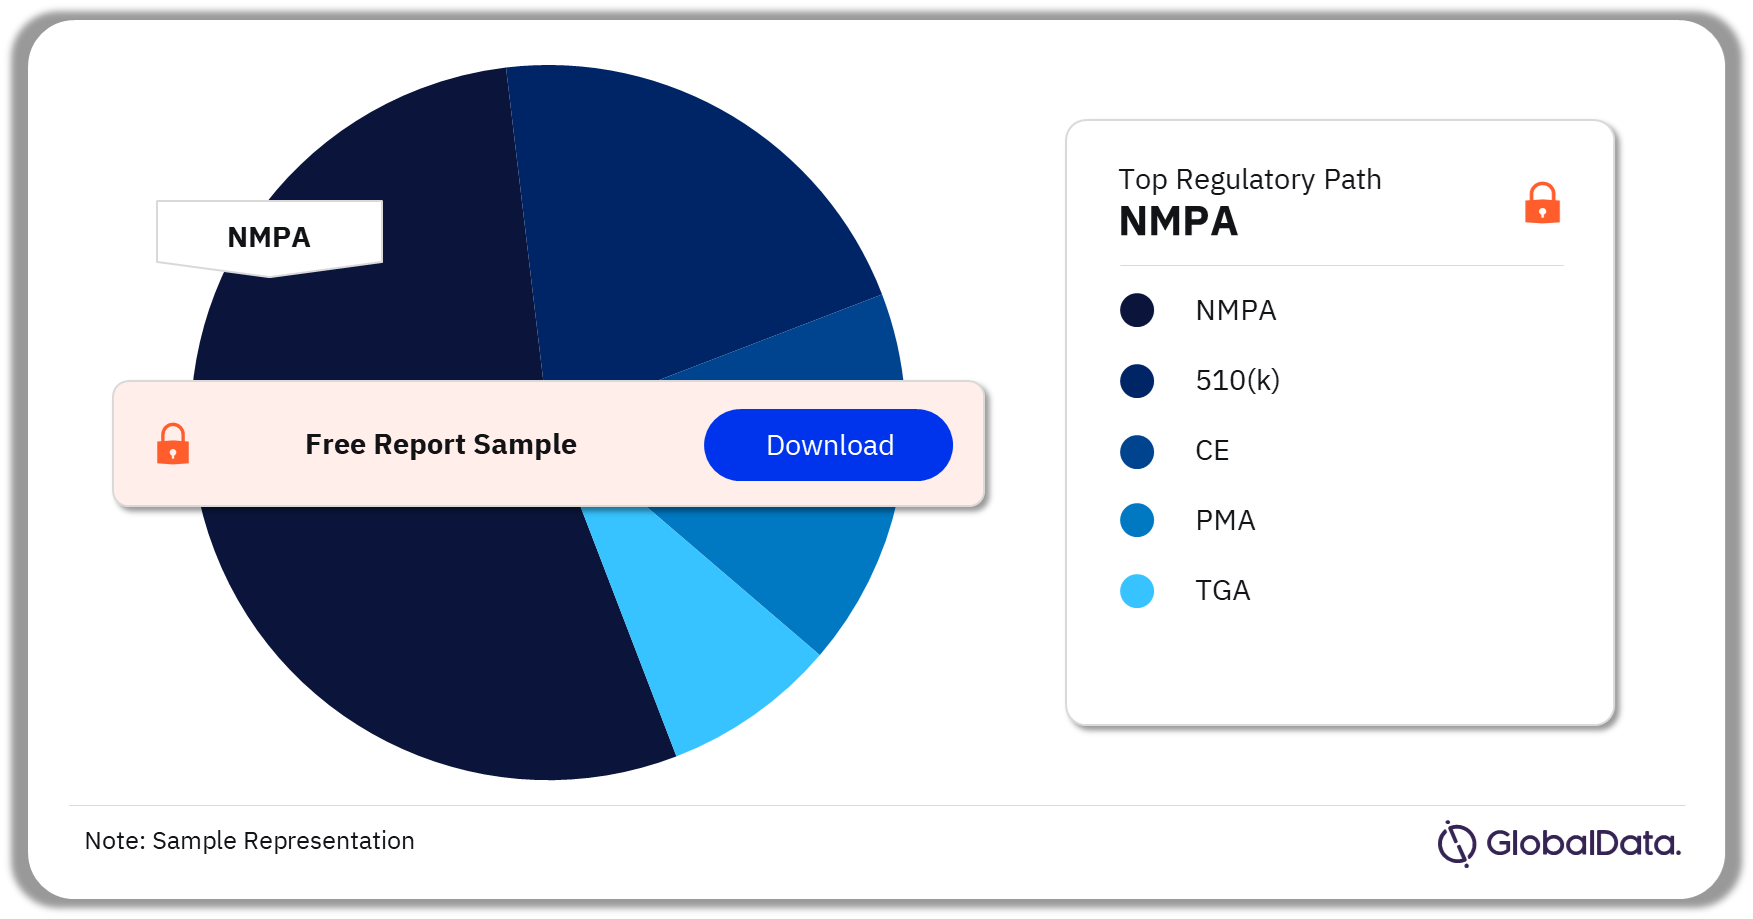 Neurovascular Accessory Devices Pipeline Market Analysis by Regulatory Paths, 2023 (%)